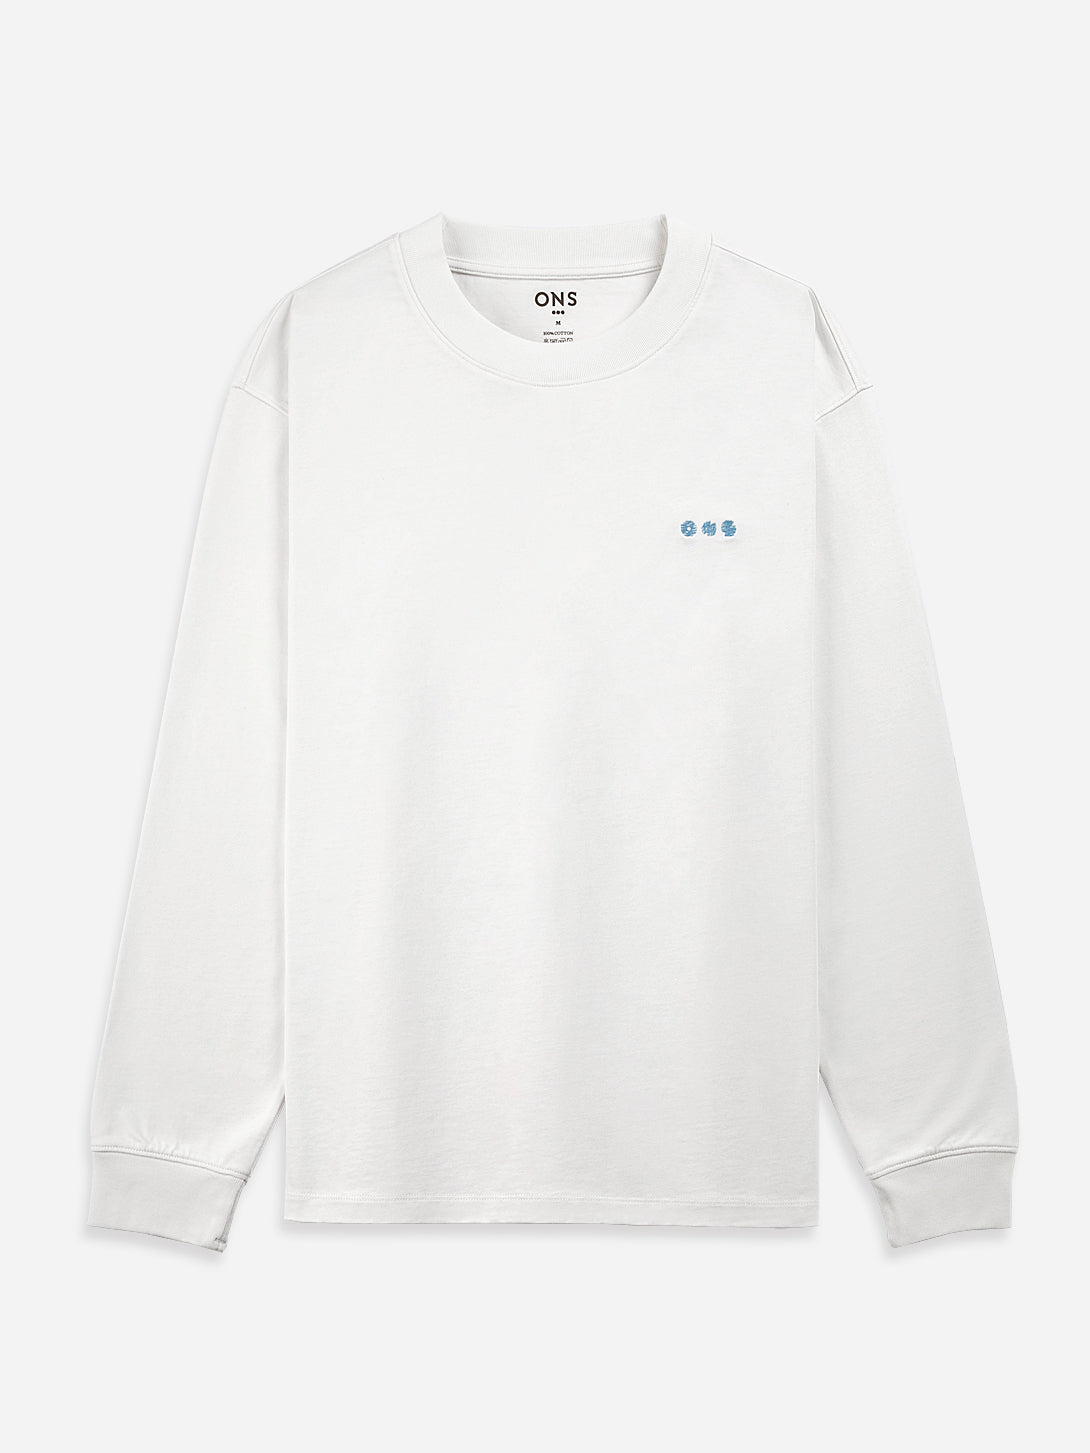 Off White Long Sleeve Mens Graphic Tee